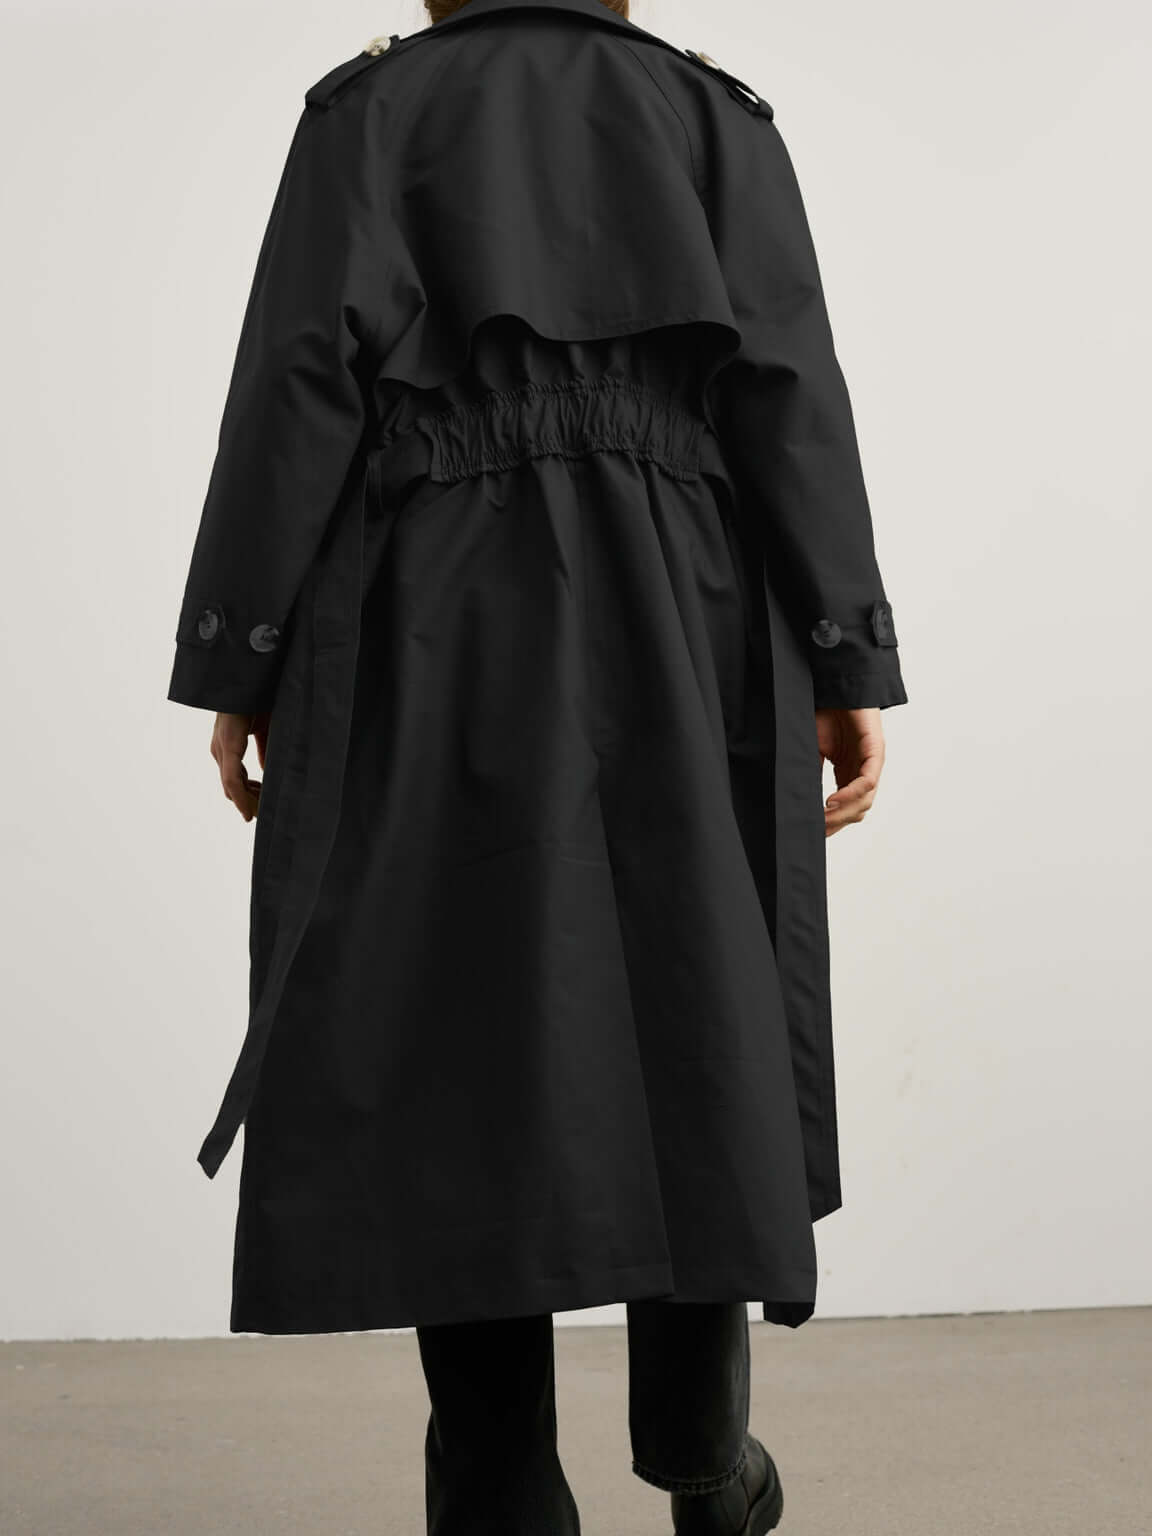 Meotine Cassandra Trench Coat in Black available at TNT The New Trend Australia. Free shipping on orders over $300 AUD.